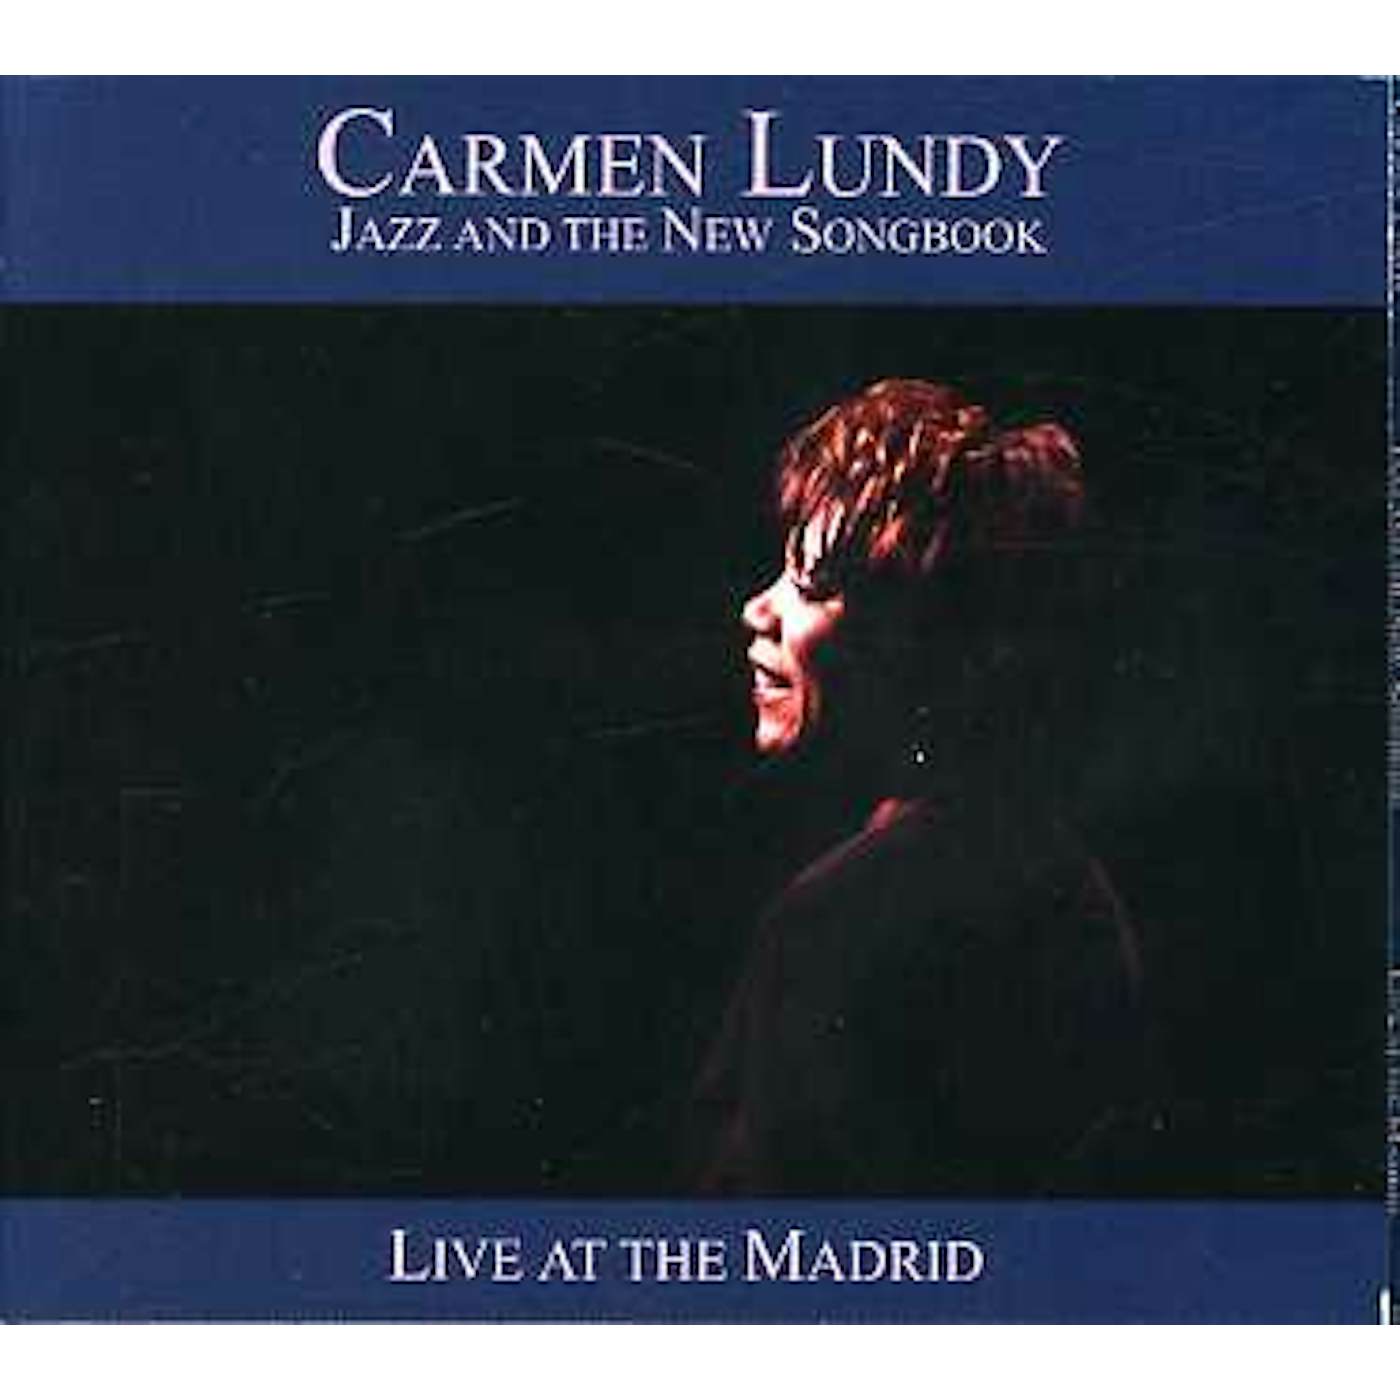 Carmen Lundy JAZZ & THE NEW SONGBOOK: LIVE AT THE MADRID CD